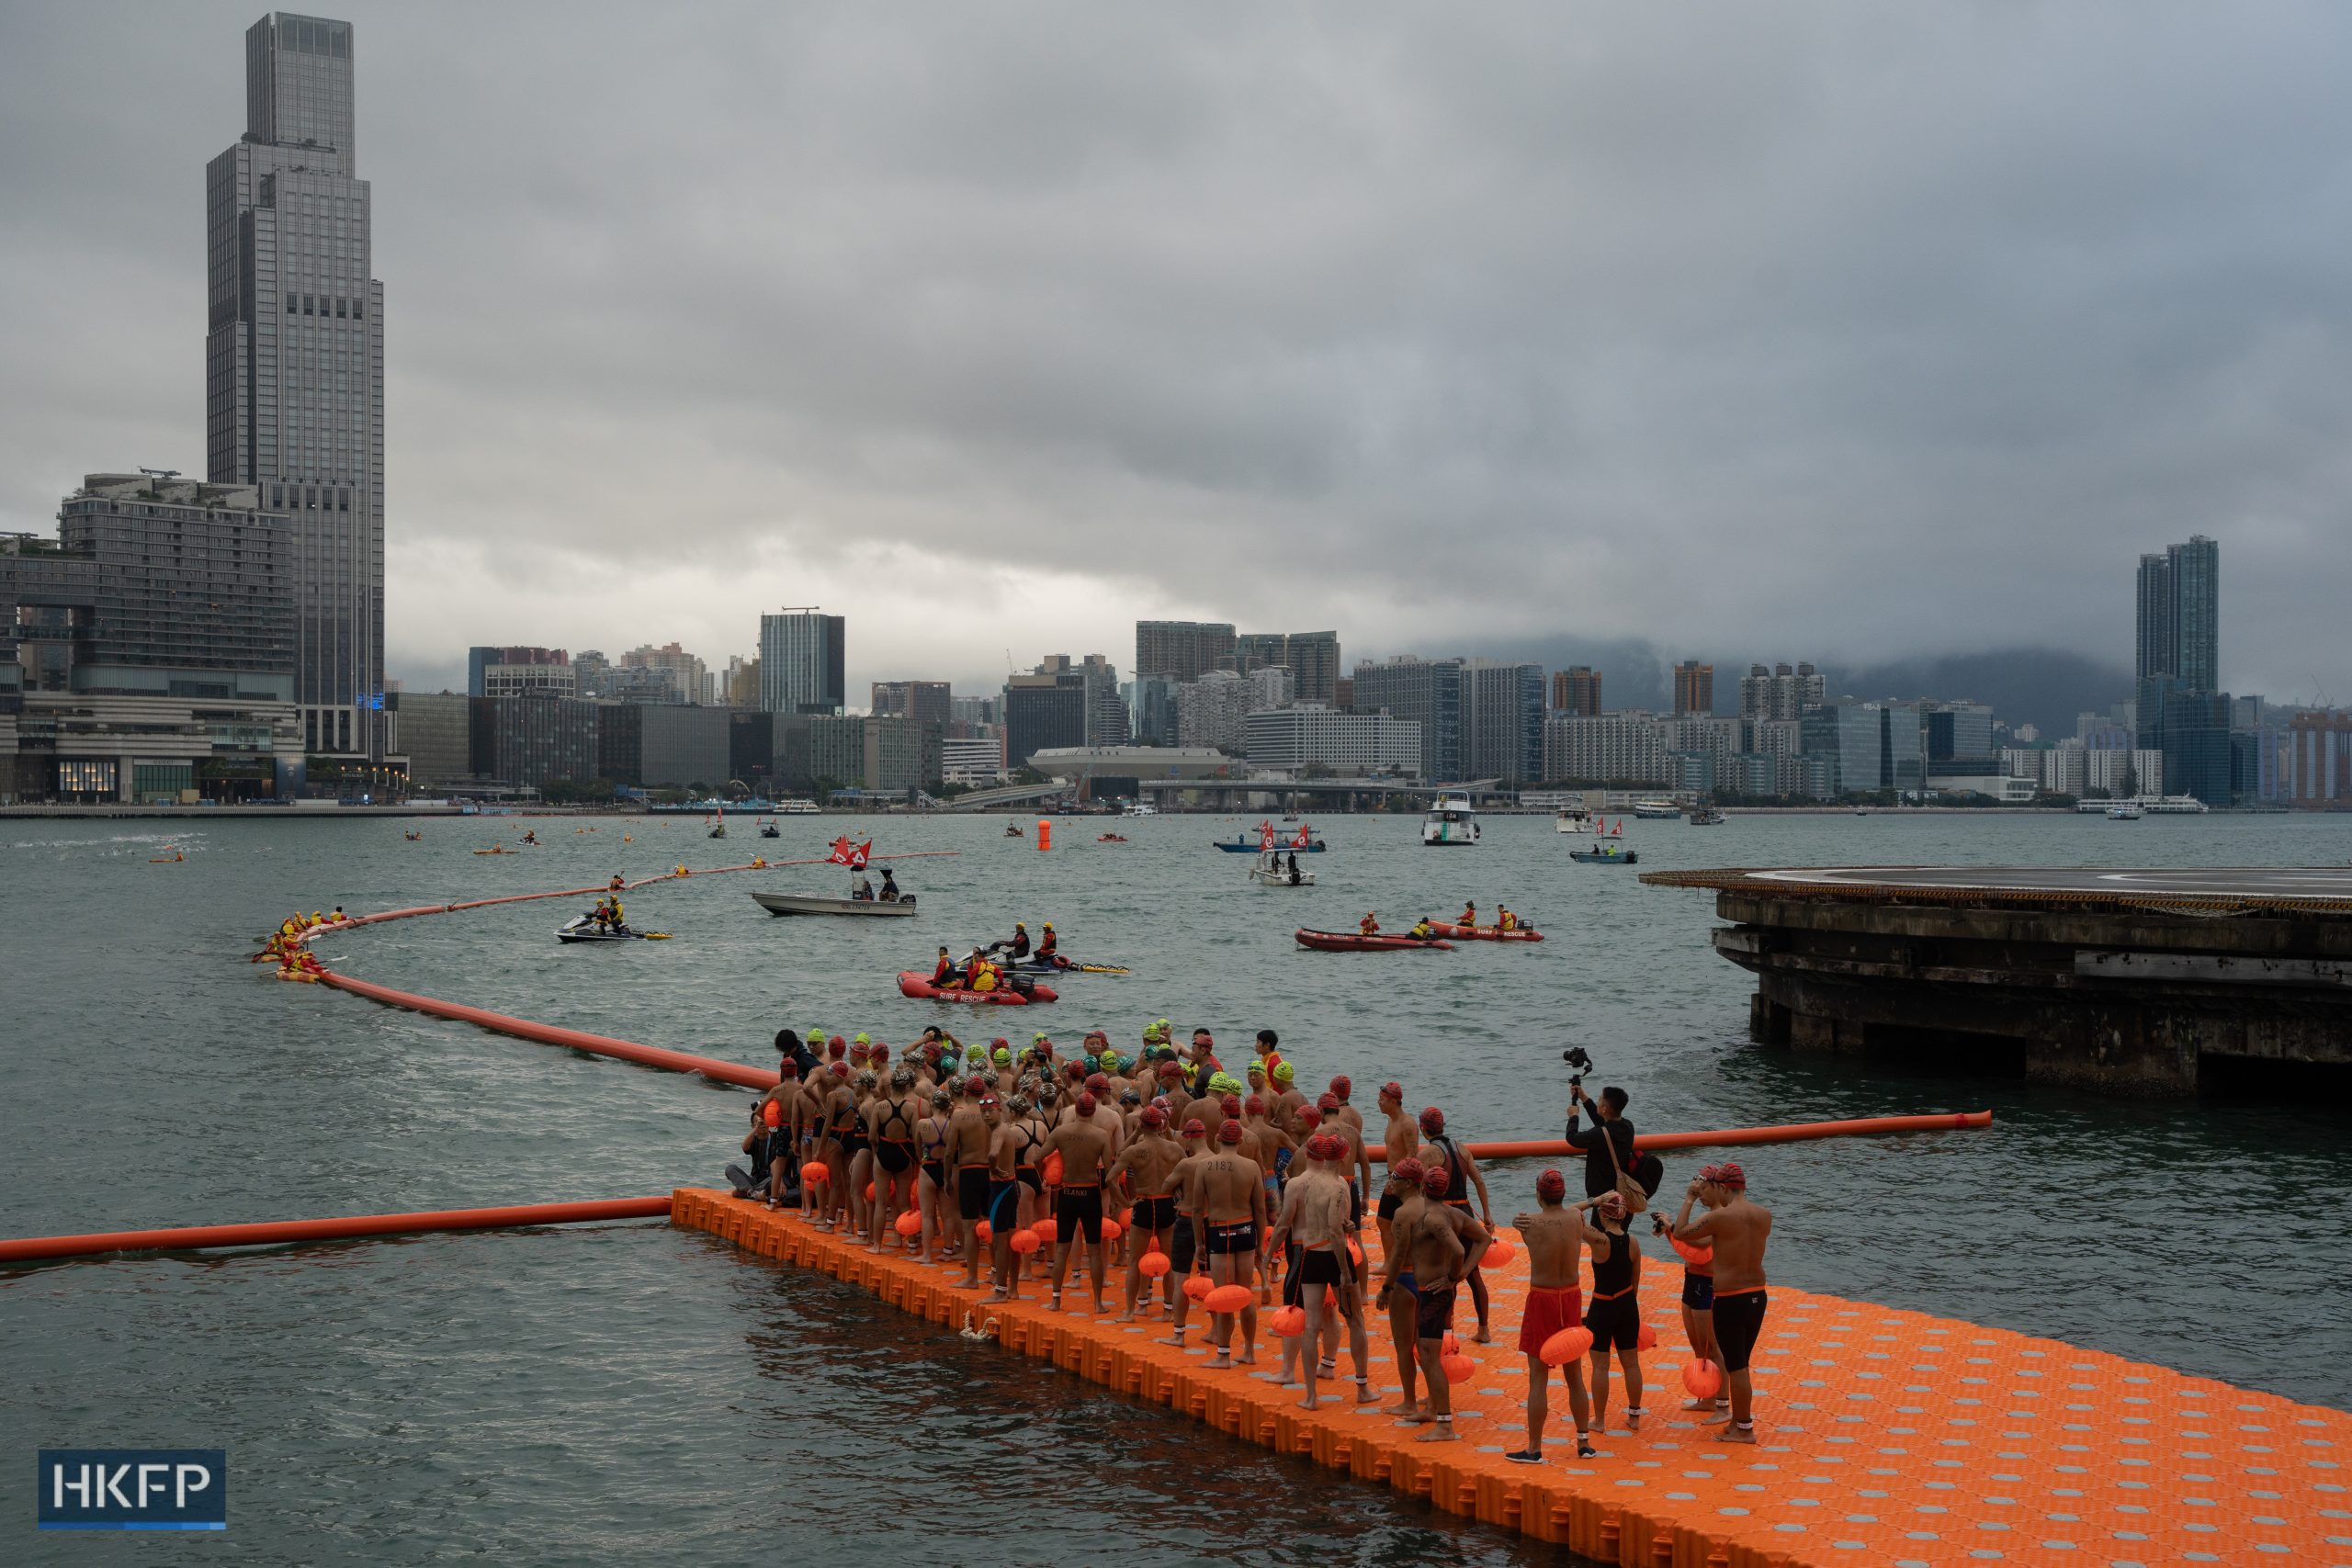 Swimmers prepare to race across the harbour on November 12, 2022. Photo: Kyle Lam/HKFP.